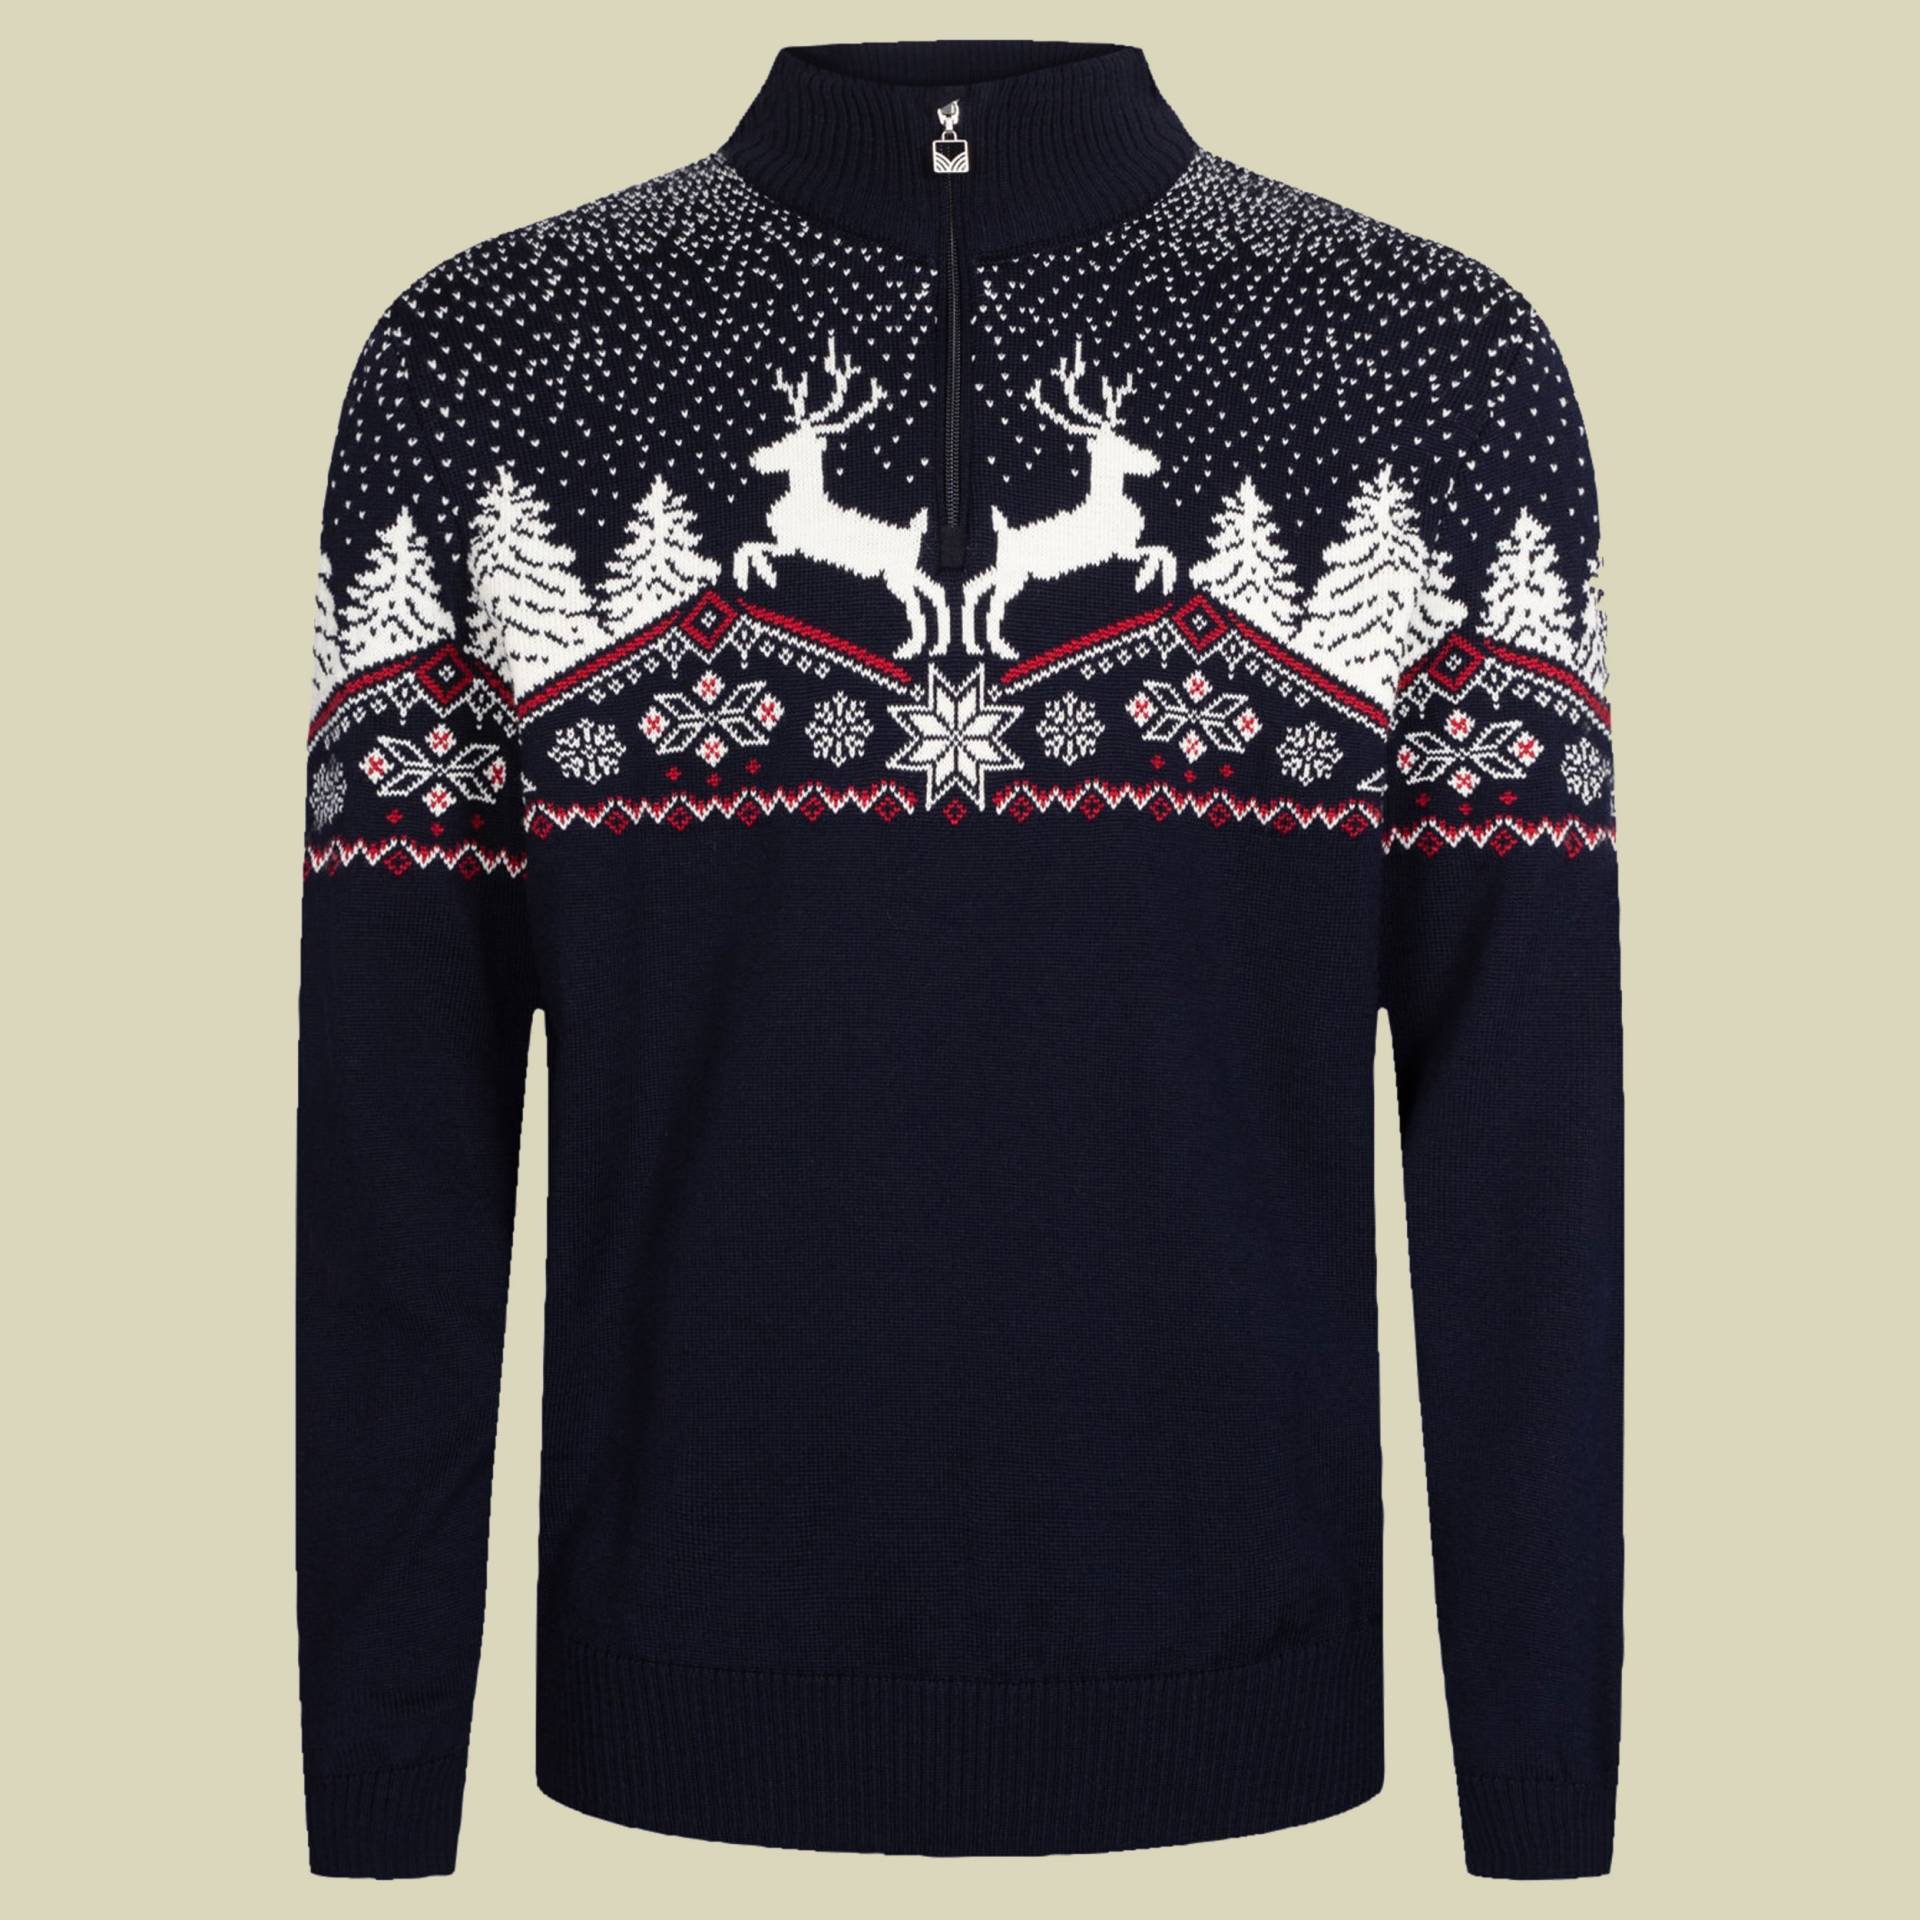 Dale Christmas Sweater Men Größe S Farbe navy offwhite redrose von Dale of Norway